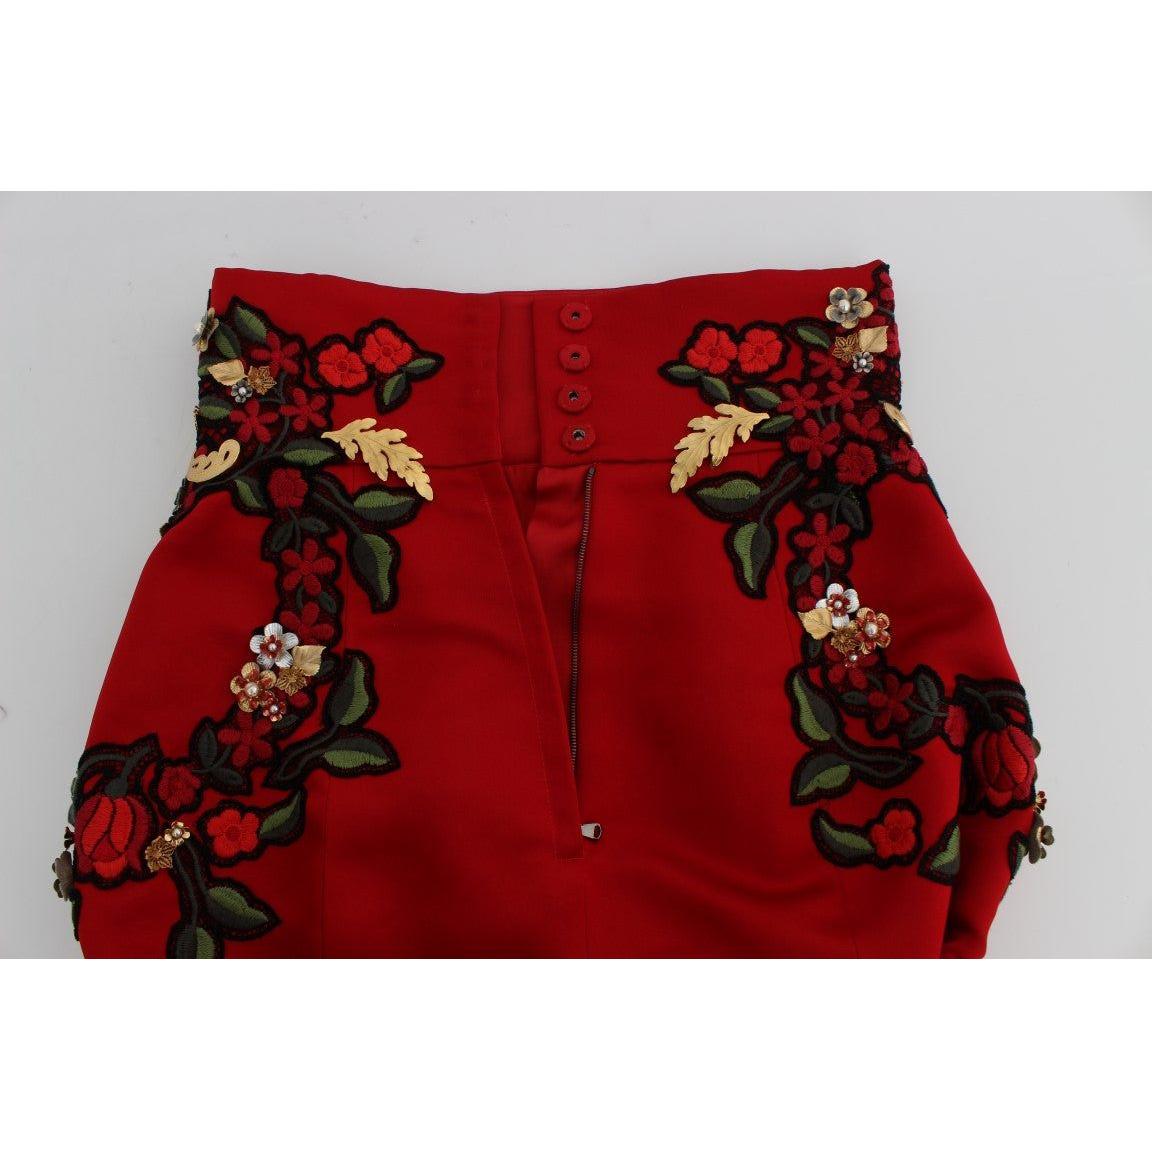 Dolce & Gabbana Elegant Silk Red Embroidered Mini Shorts red-silk-pearls-roses-shorts